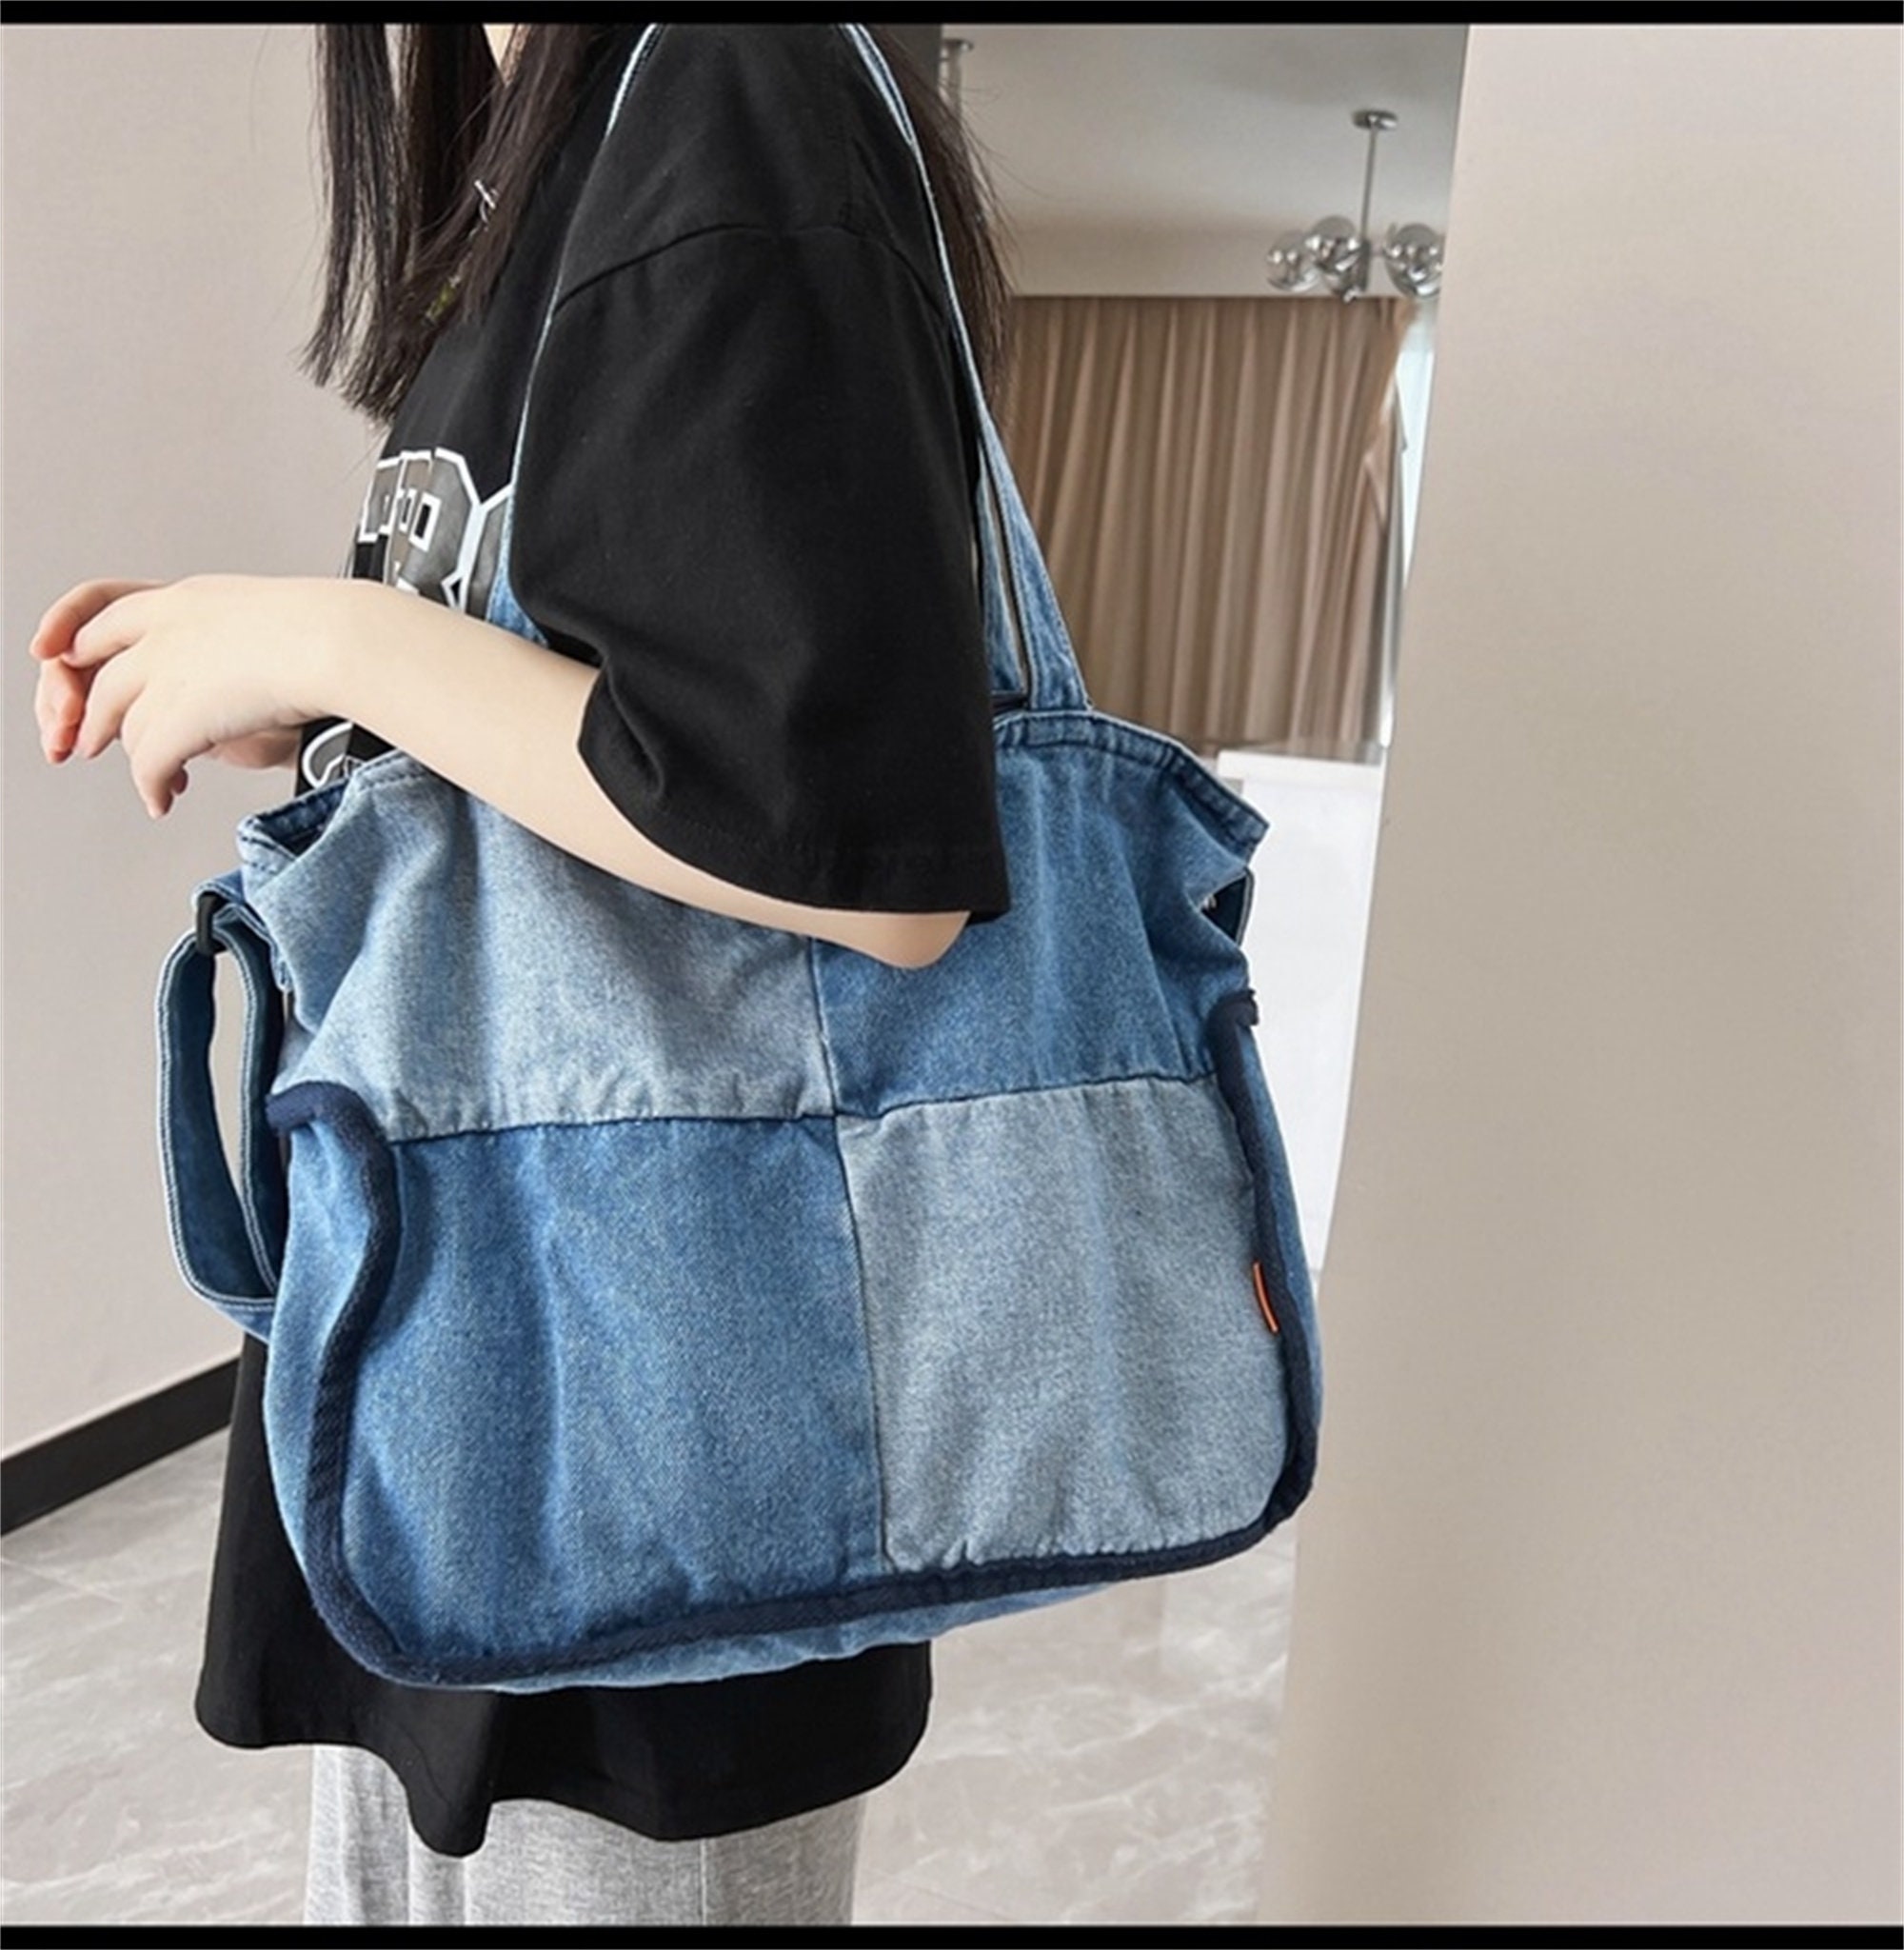 Buy Denim Tote Bag, Jean purses for women denim, Bojo Blue Jean Tote with  multiple shades of denim which make the patterns of this denim bag, jean  tote bag for women with